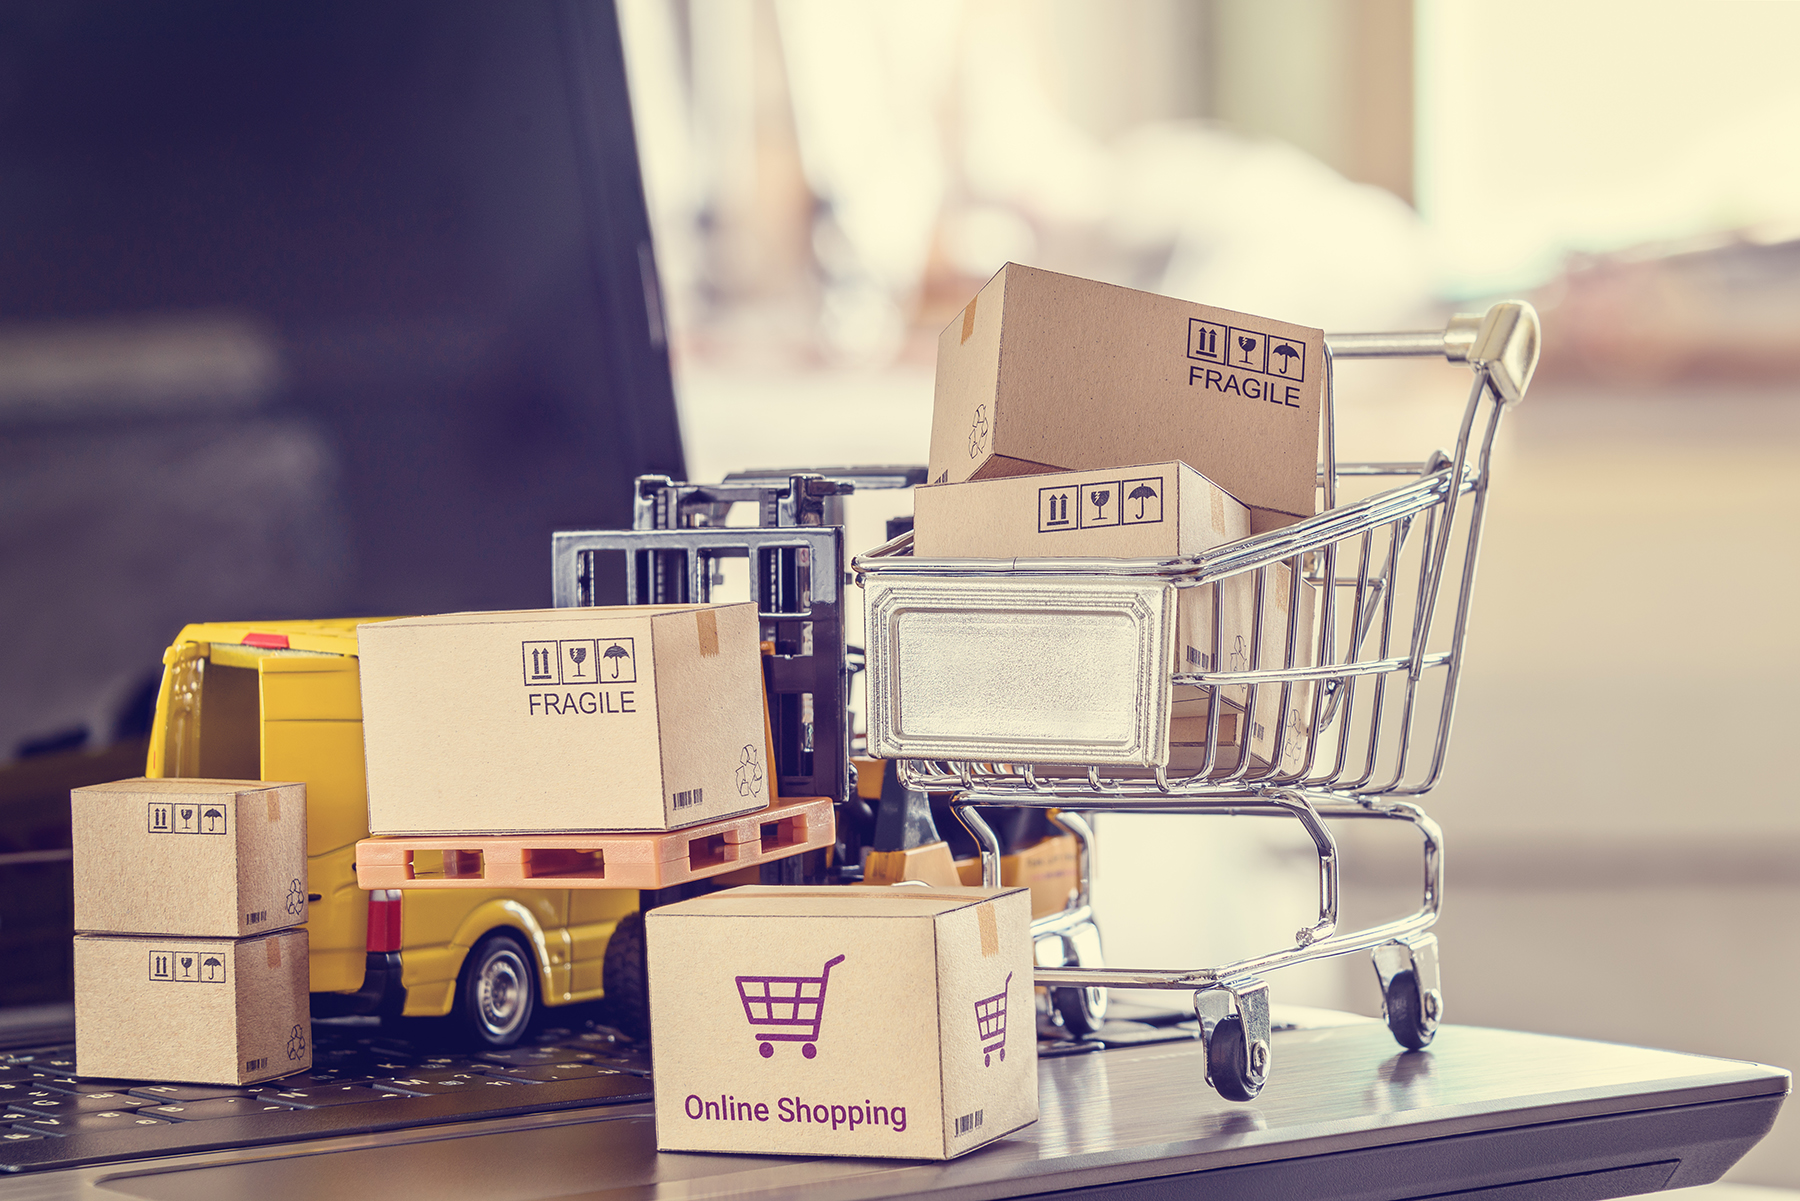 Blockchain Technology Disrupting the CPG and Retail Industries